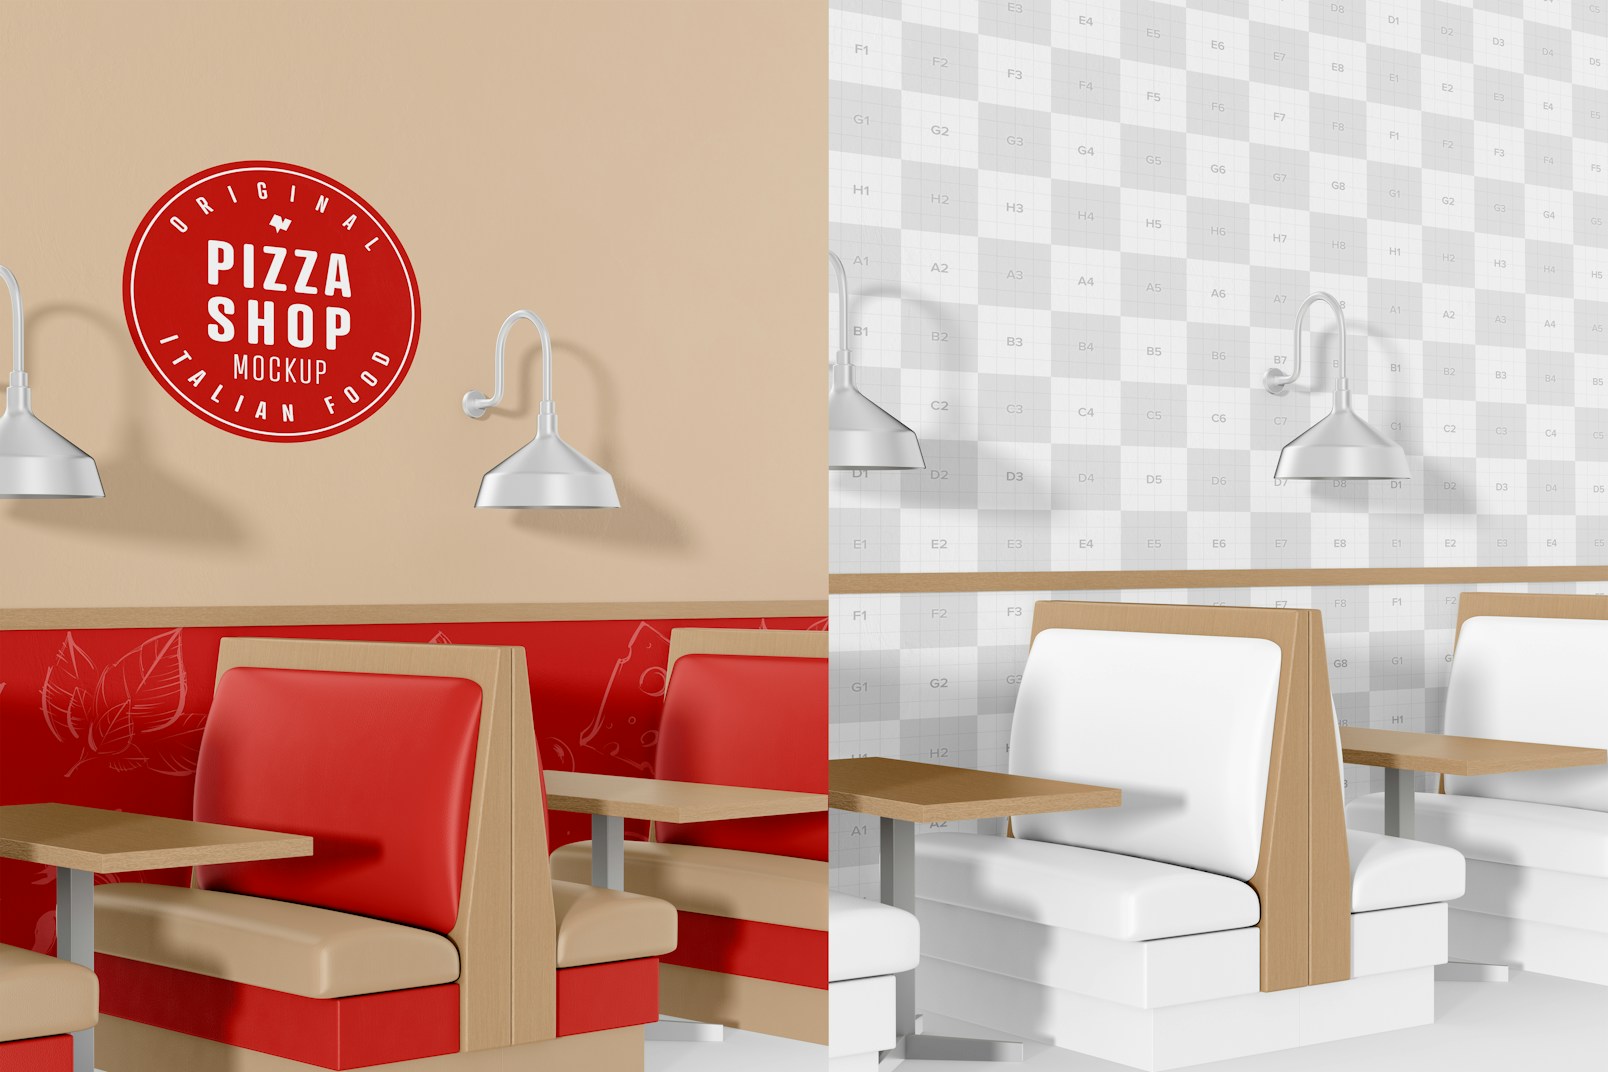 Pizza Shop Chair and Table Scene Mockup